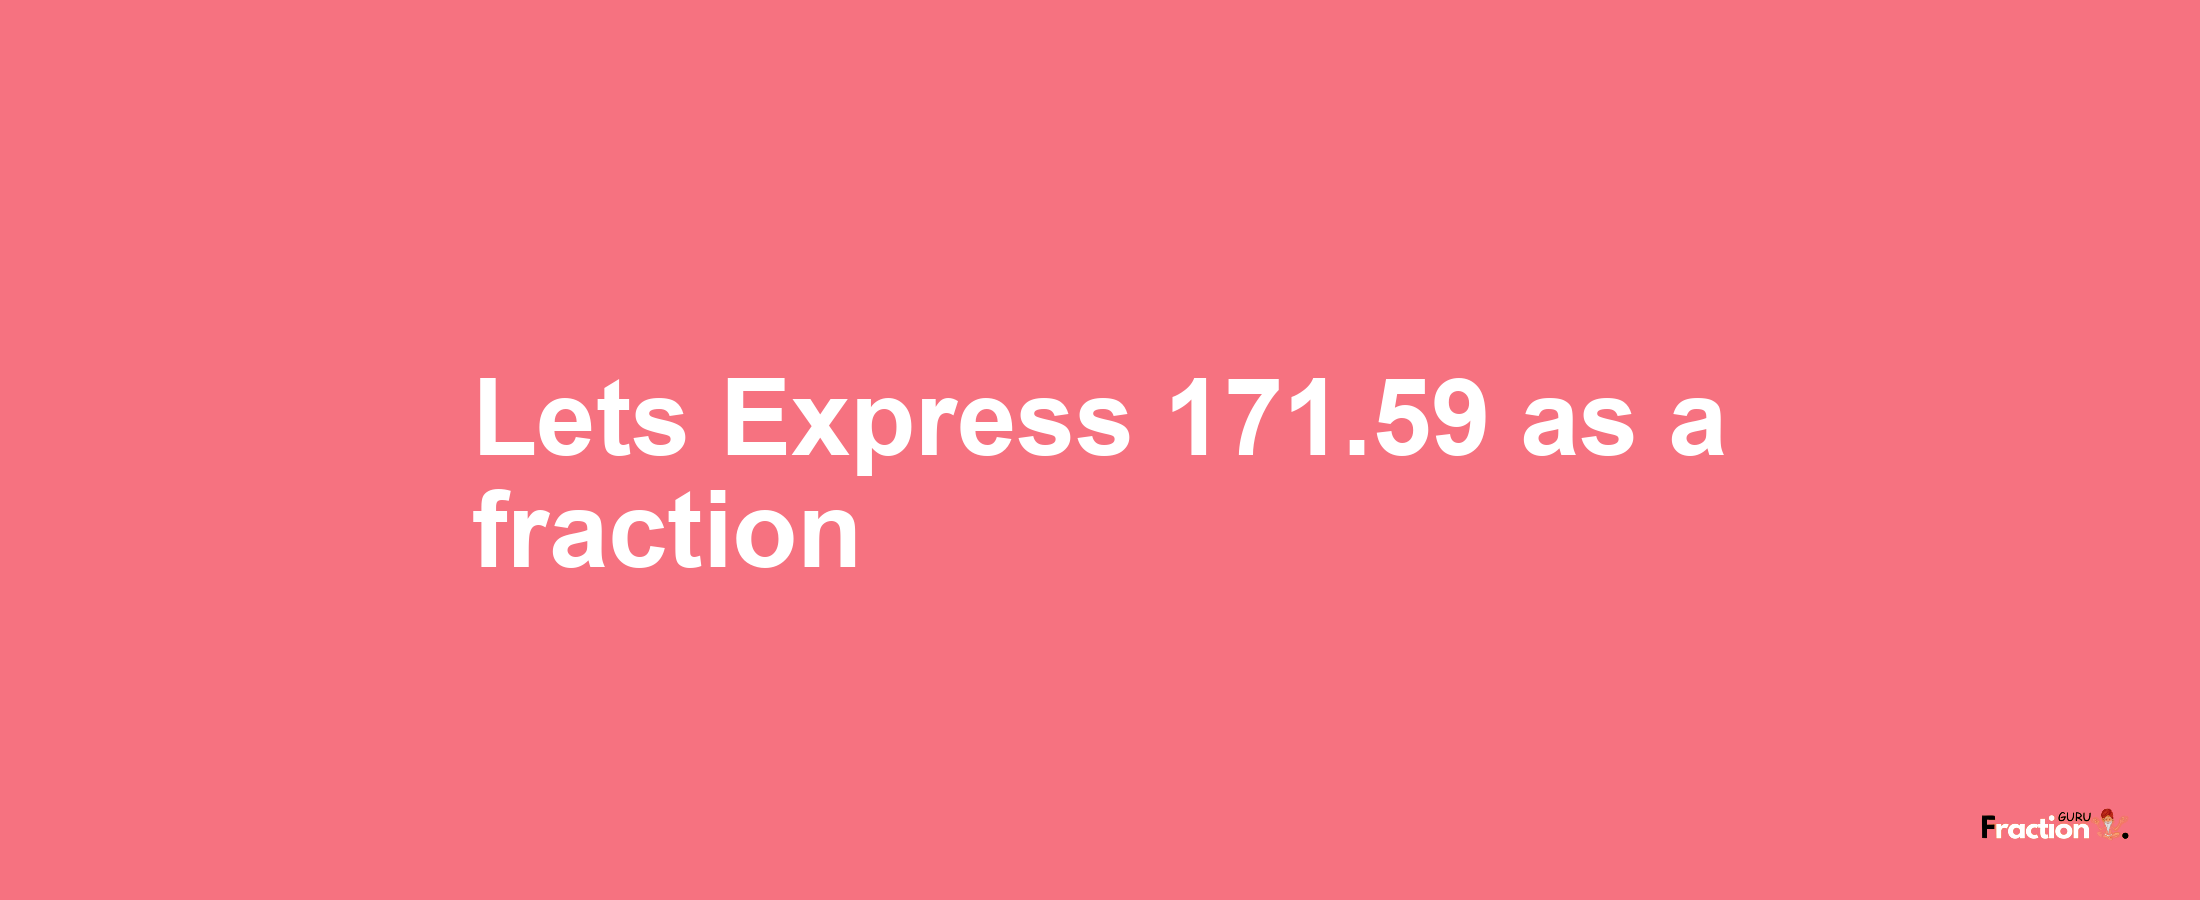 Lets Express 171.59 as afraction